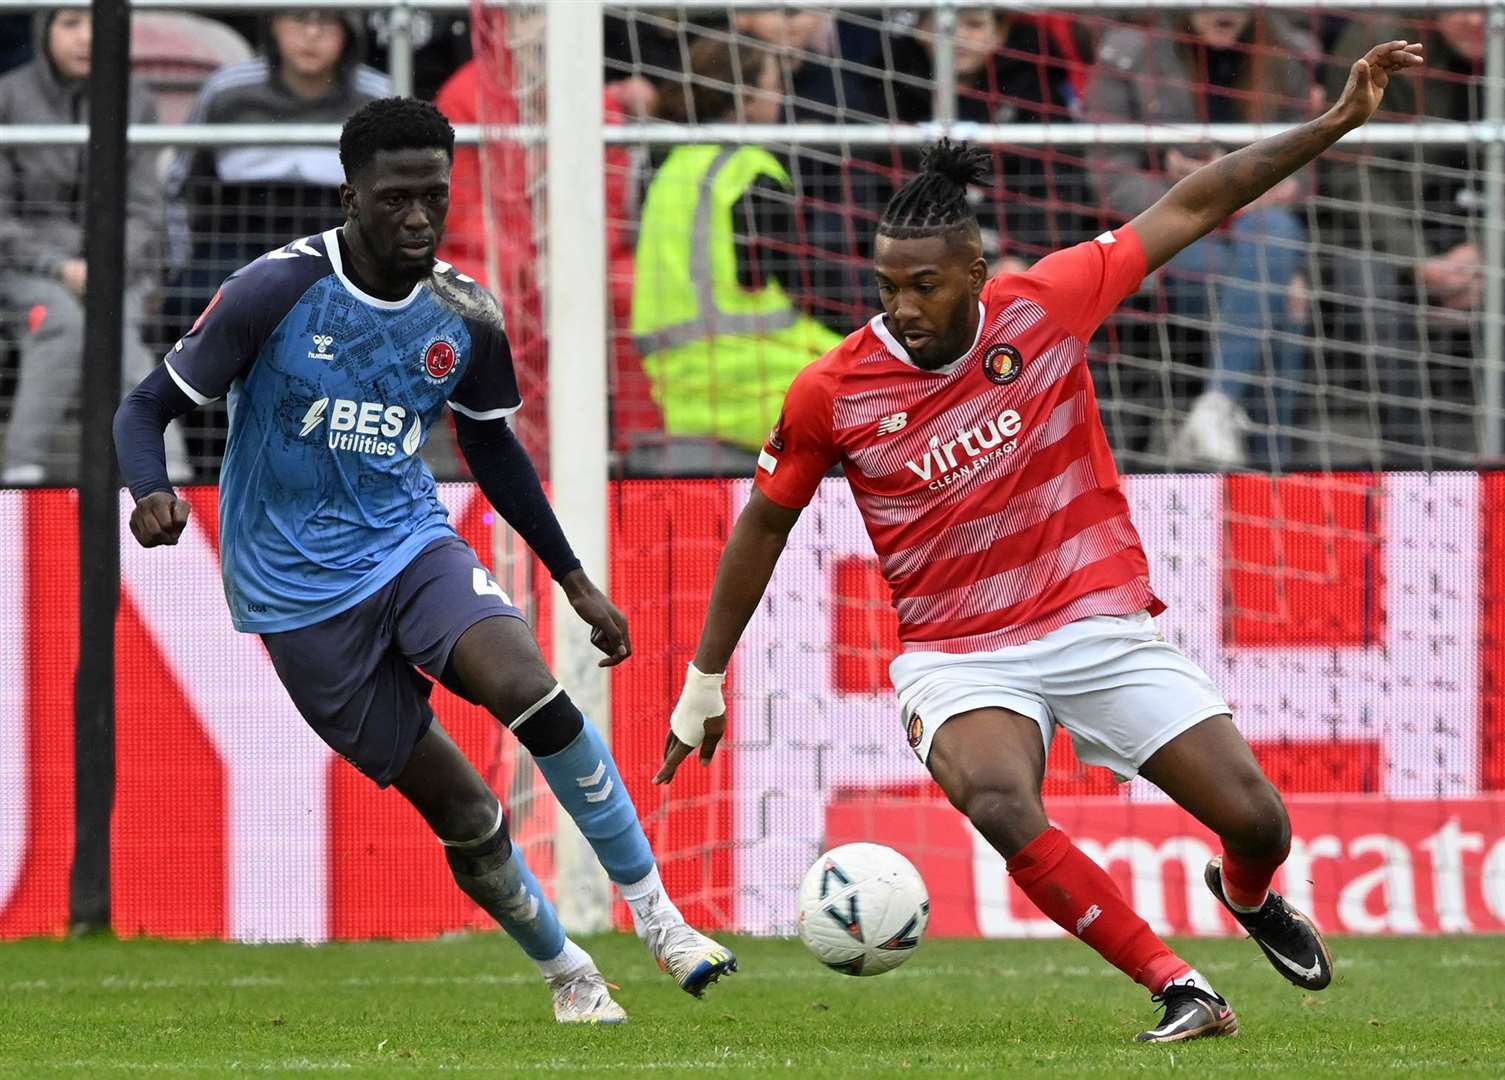 Ebbsfleet's Dominic Poleon will face tougher tests than last season when he goes up against National League opponents. Picture: Keith Gillard